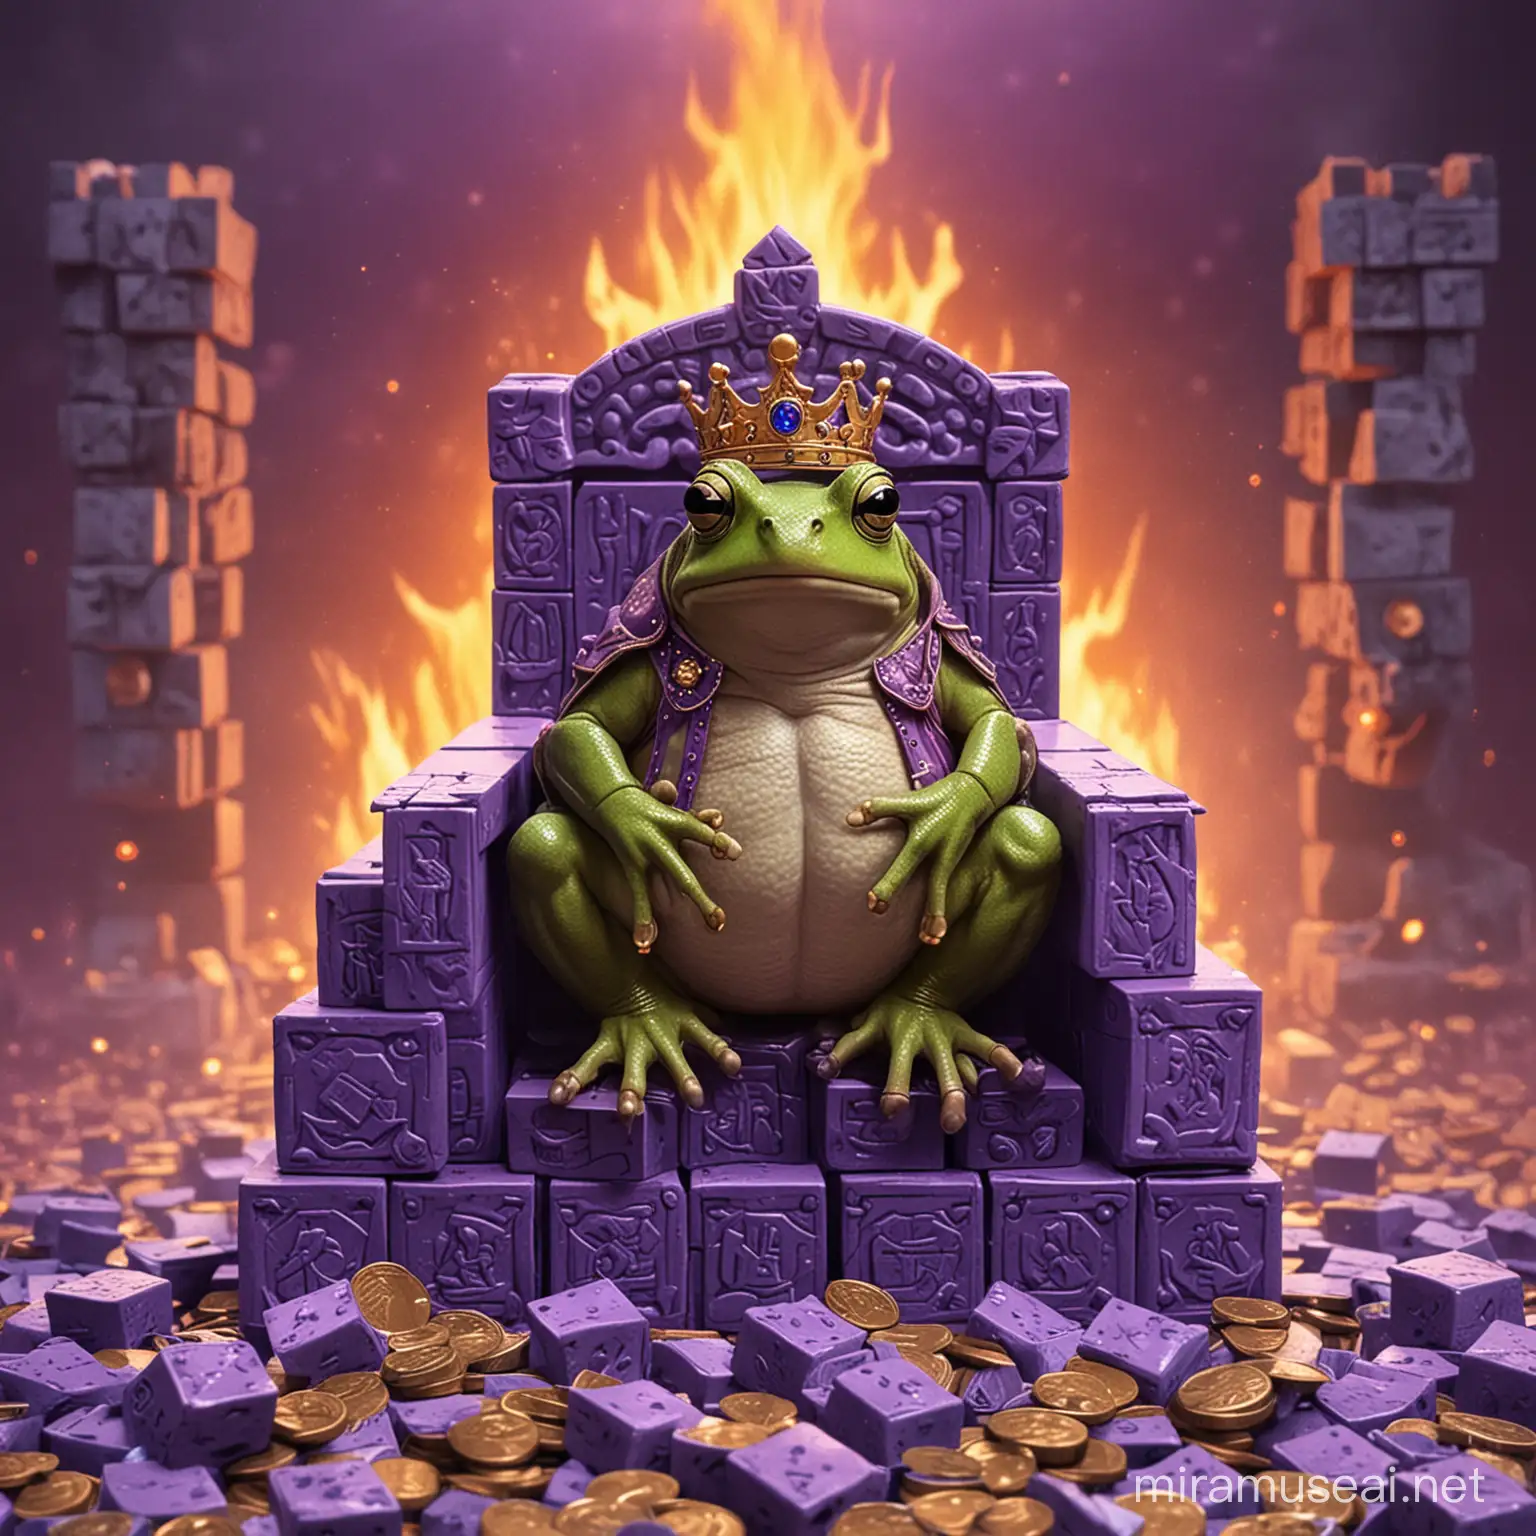 Majestic Frog King on a Throne of Royal Purple Blocks with Flaming Background and Treasures of Coins